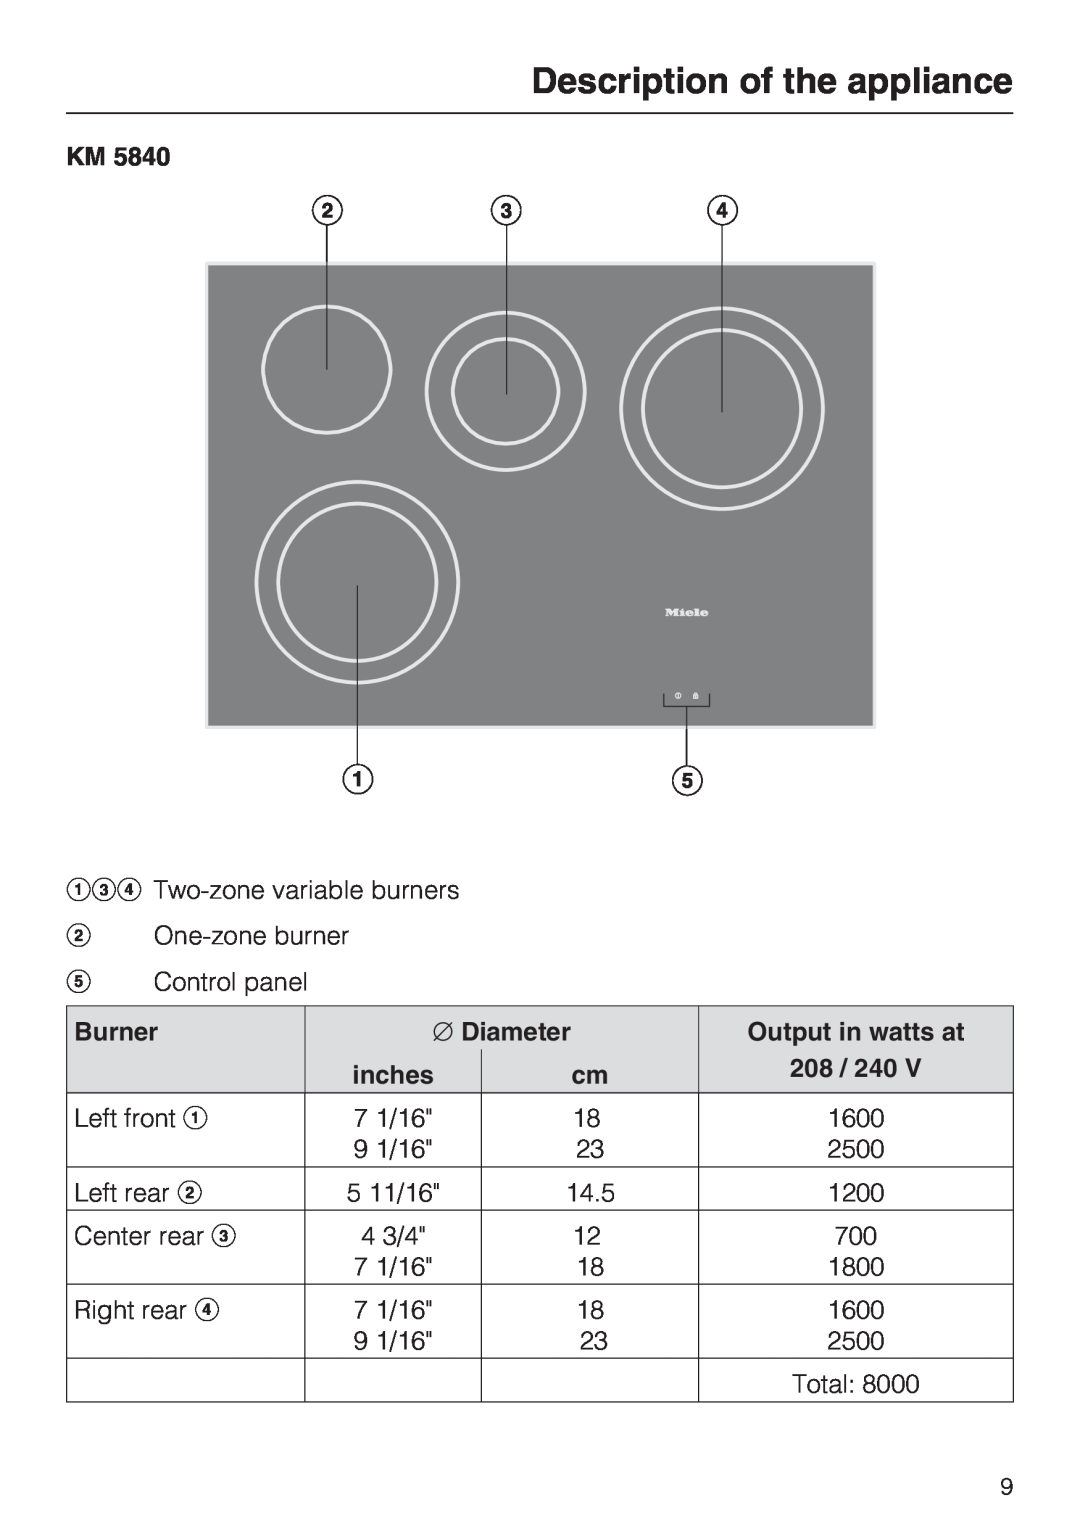 Miele KM 5860, KM 5880, KM 5840 Description of the appliance, Burner, Diameter, Output in watts at, inches, 208 / 240 